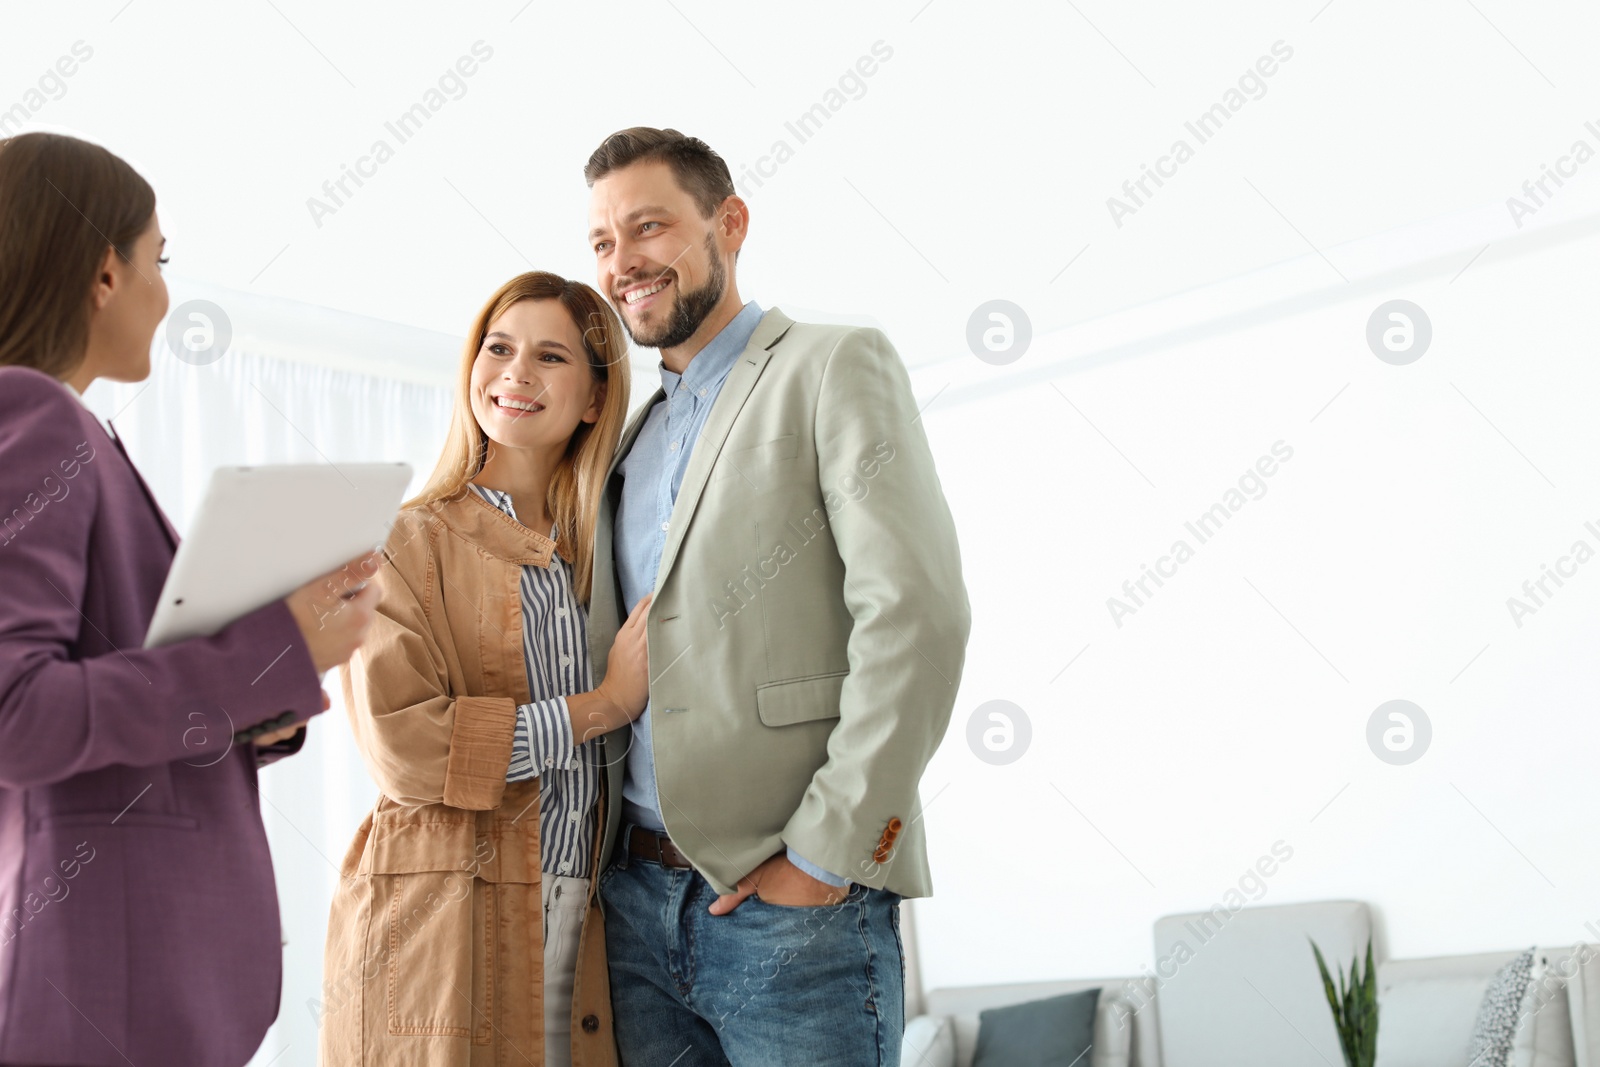 Photo of Female real estate agent working with couple in room